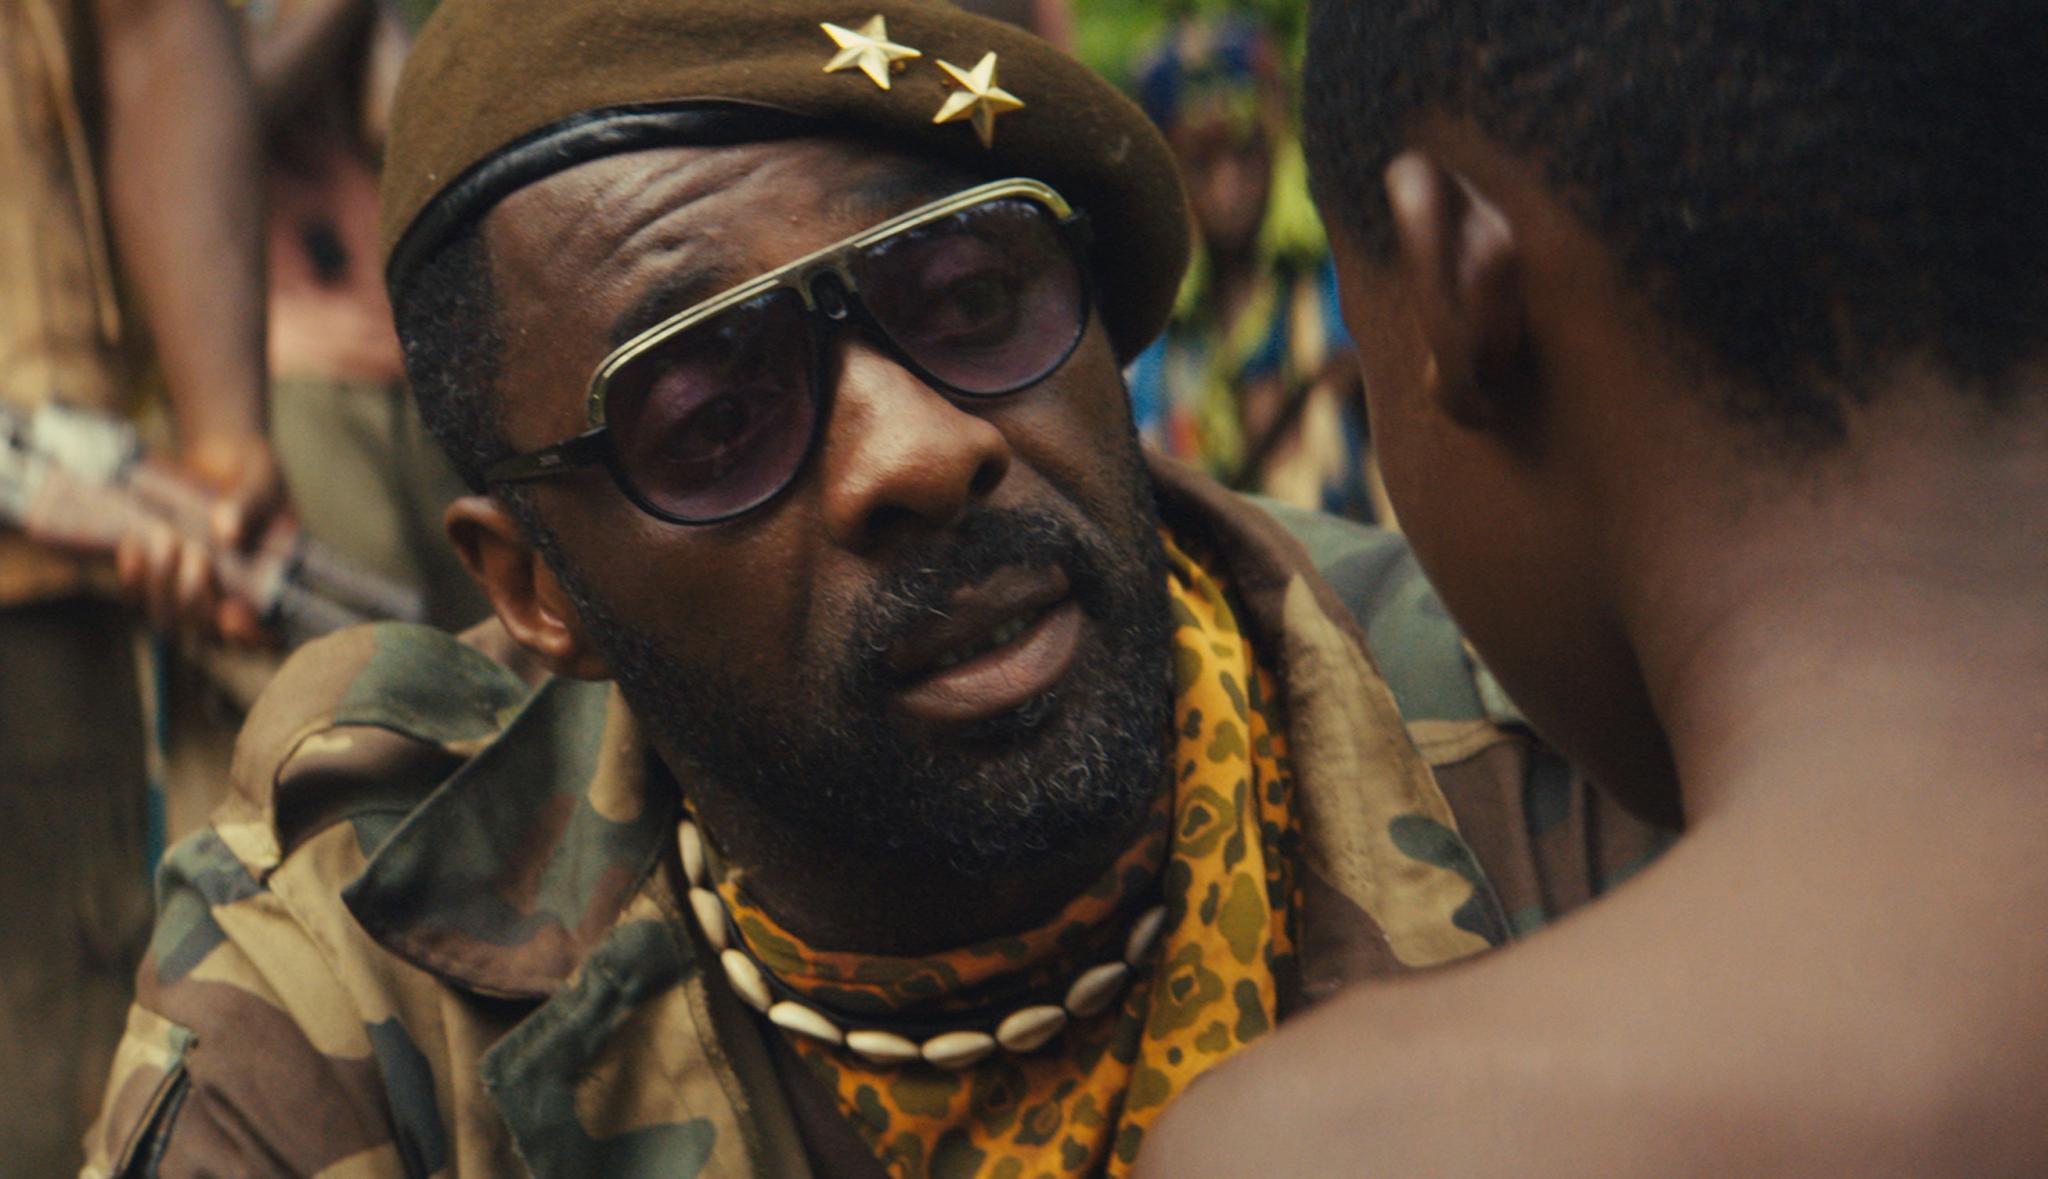 Netflix Exec Funds Education for Child Star of ‘Beasts of No Nation’